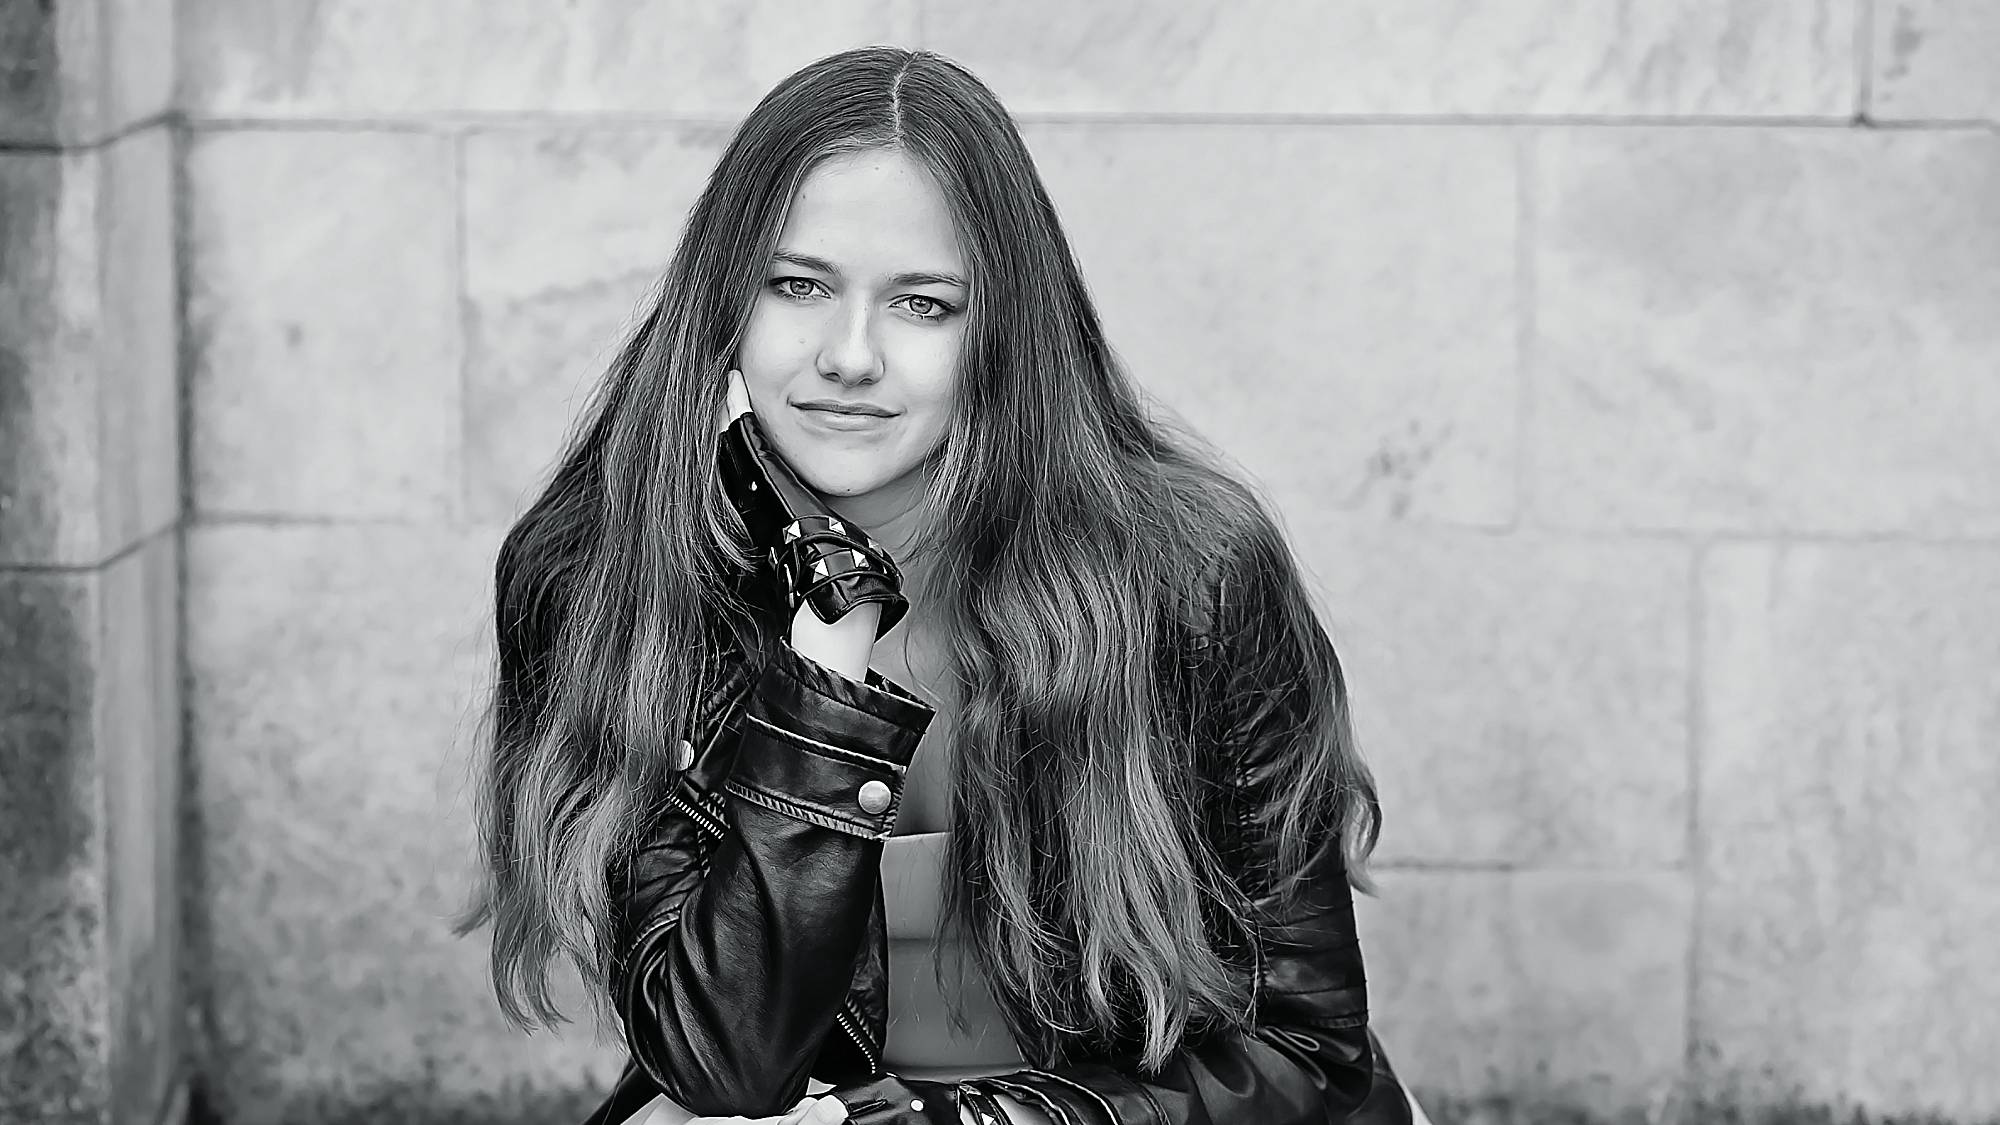 black and white image of a senior girl wearing a black leather jacket and black leather fingerless gloves. She has long wavy hair and is smirking at the camera